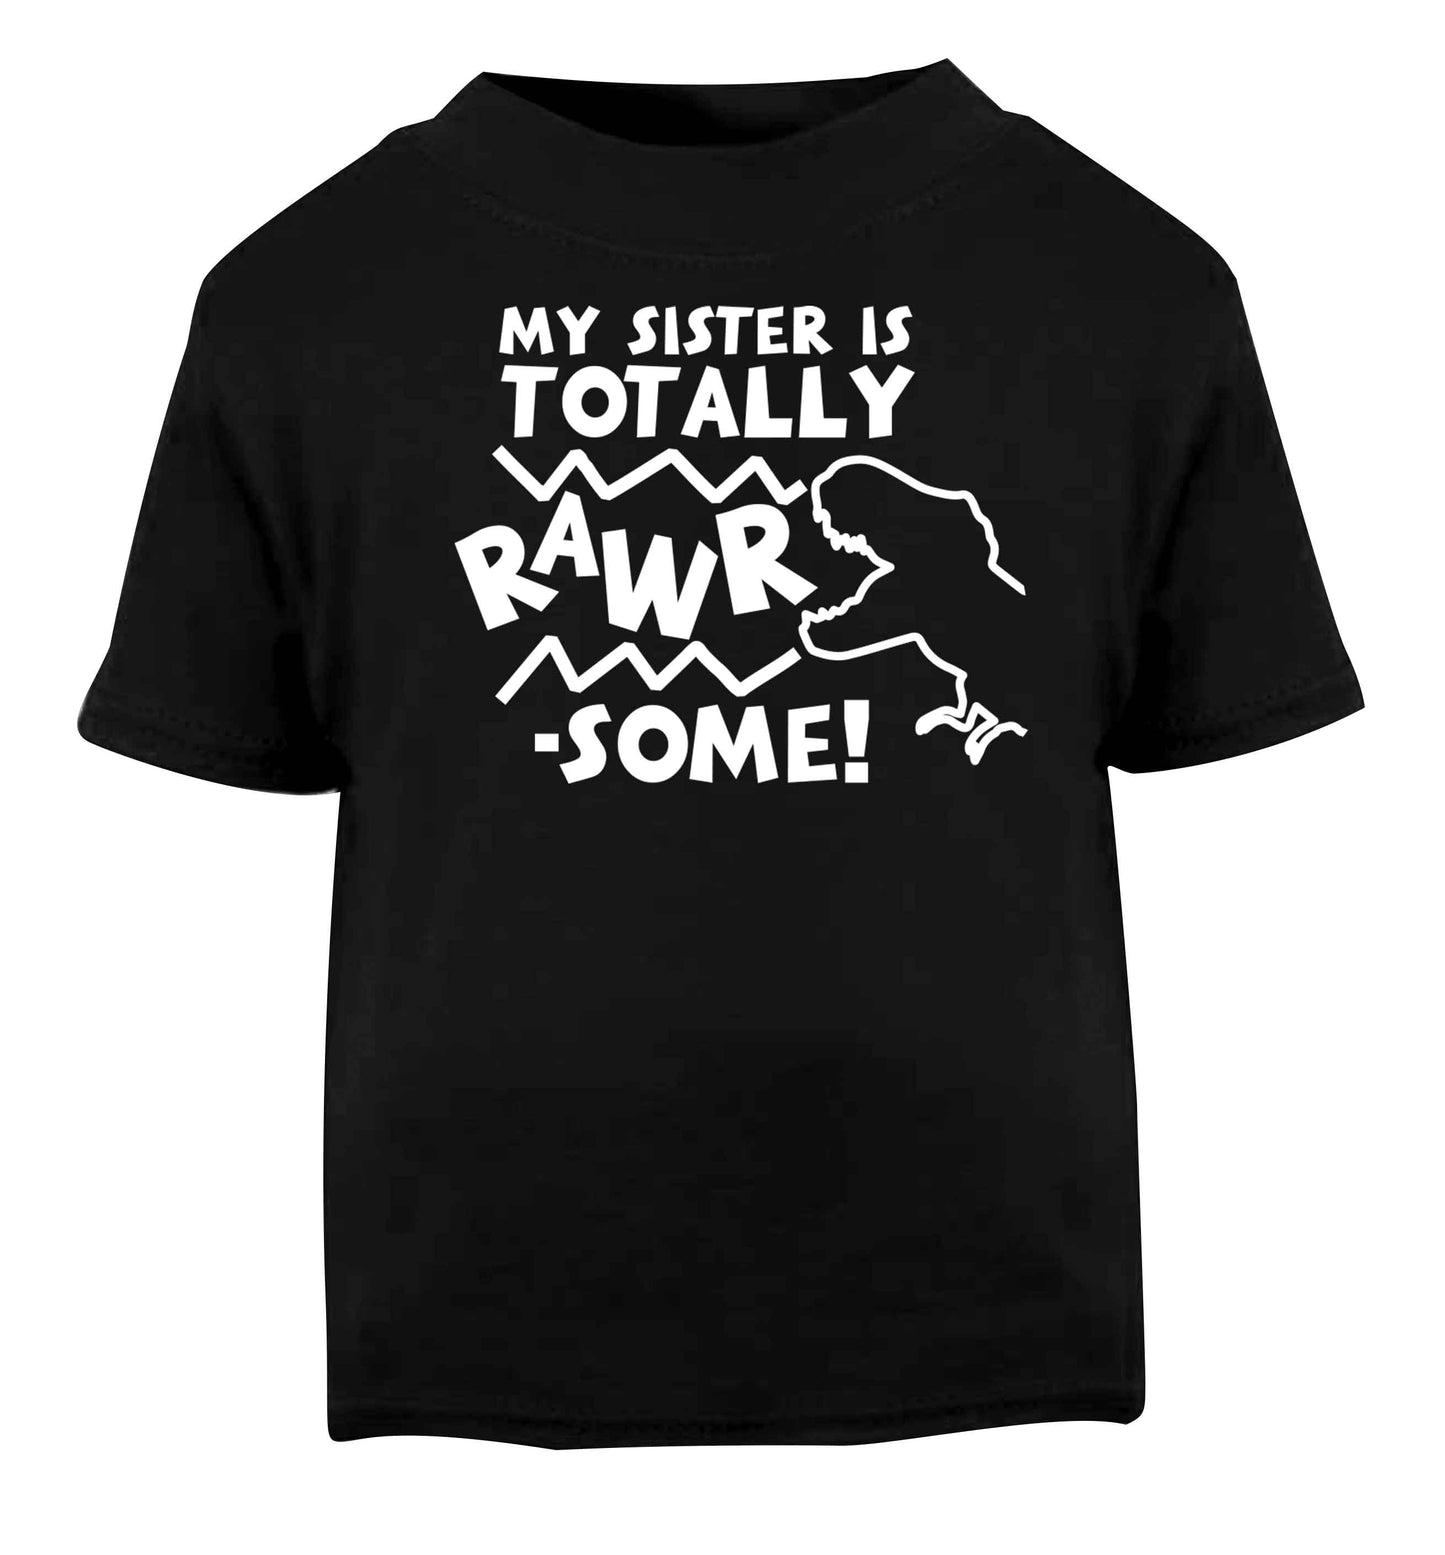 My sister is totally rawrsome Black baby toddler Tshirt 2 years